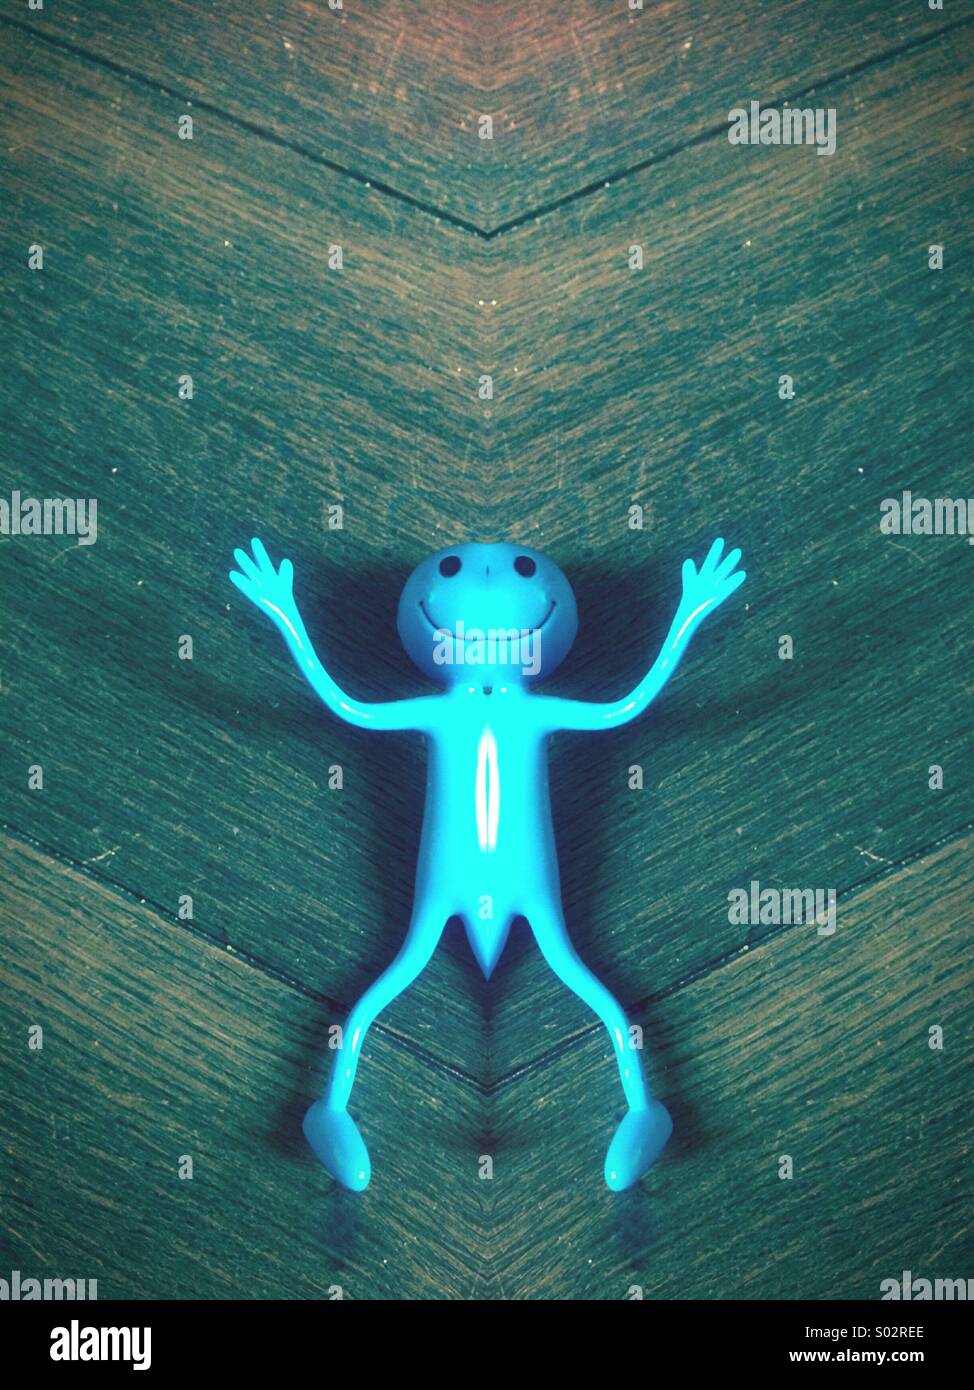 Smiley mirrored blue alien toy lying on a wooden floor Stock Photo